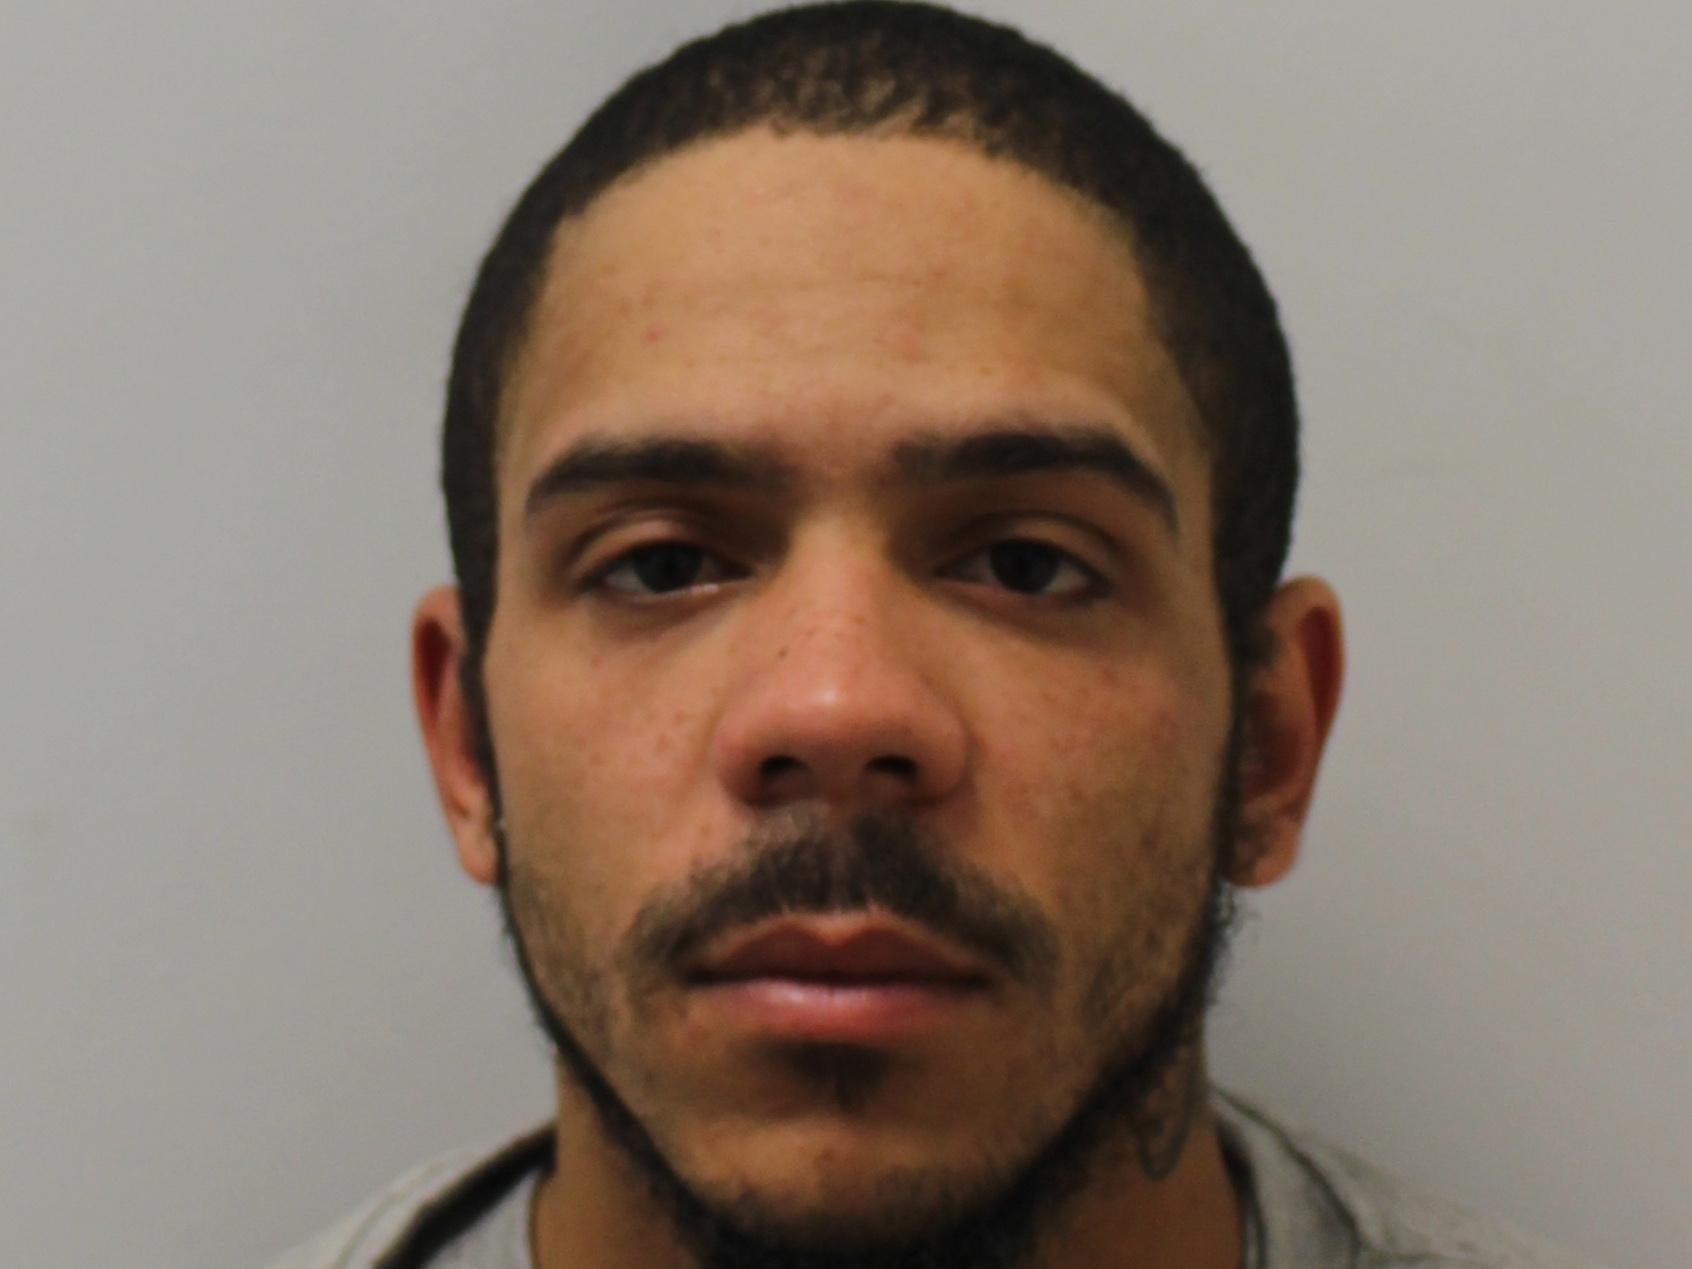 Jermaine McDonald, who has been jailed for 13 years